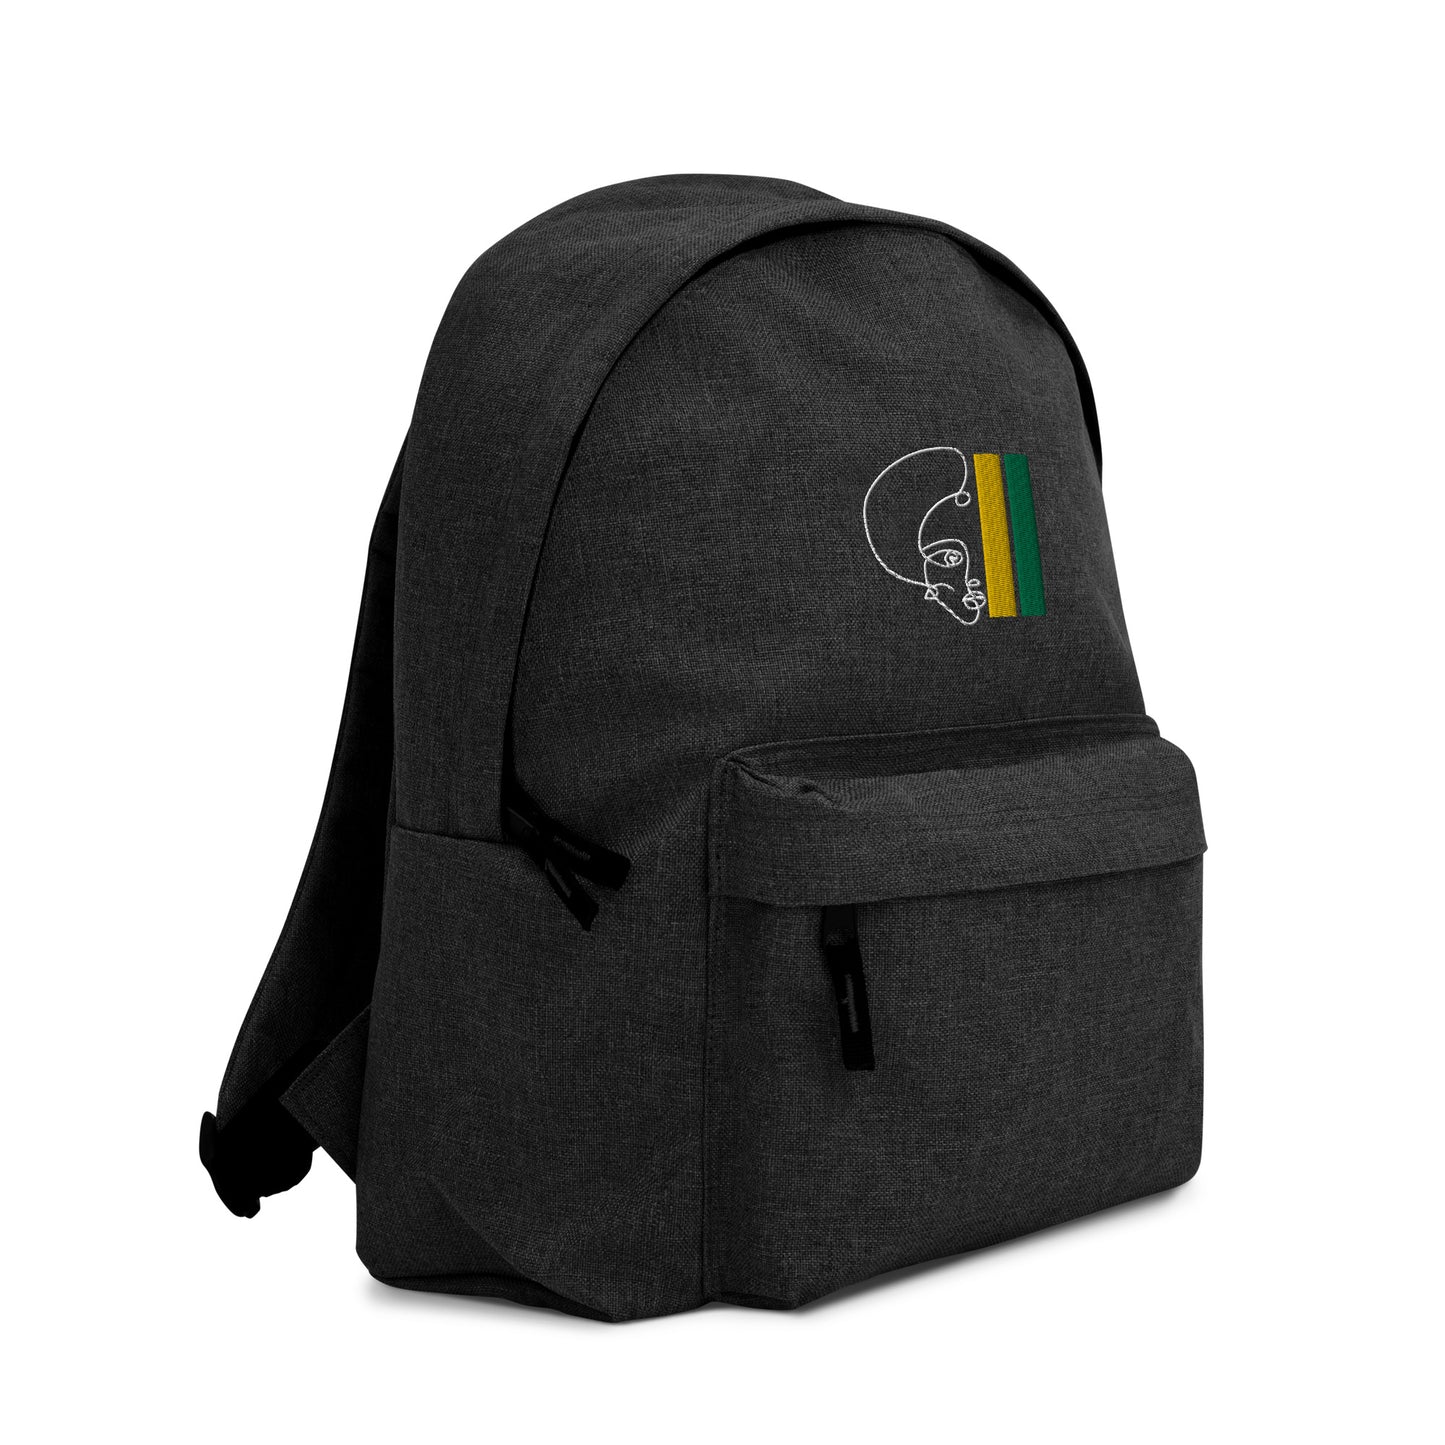 Habeshawwi peace and Love Embroidered Backpack